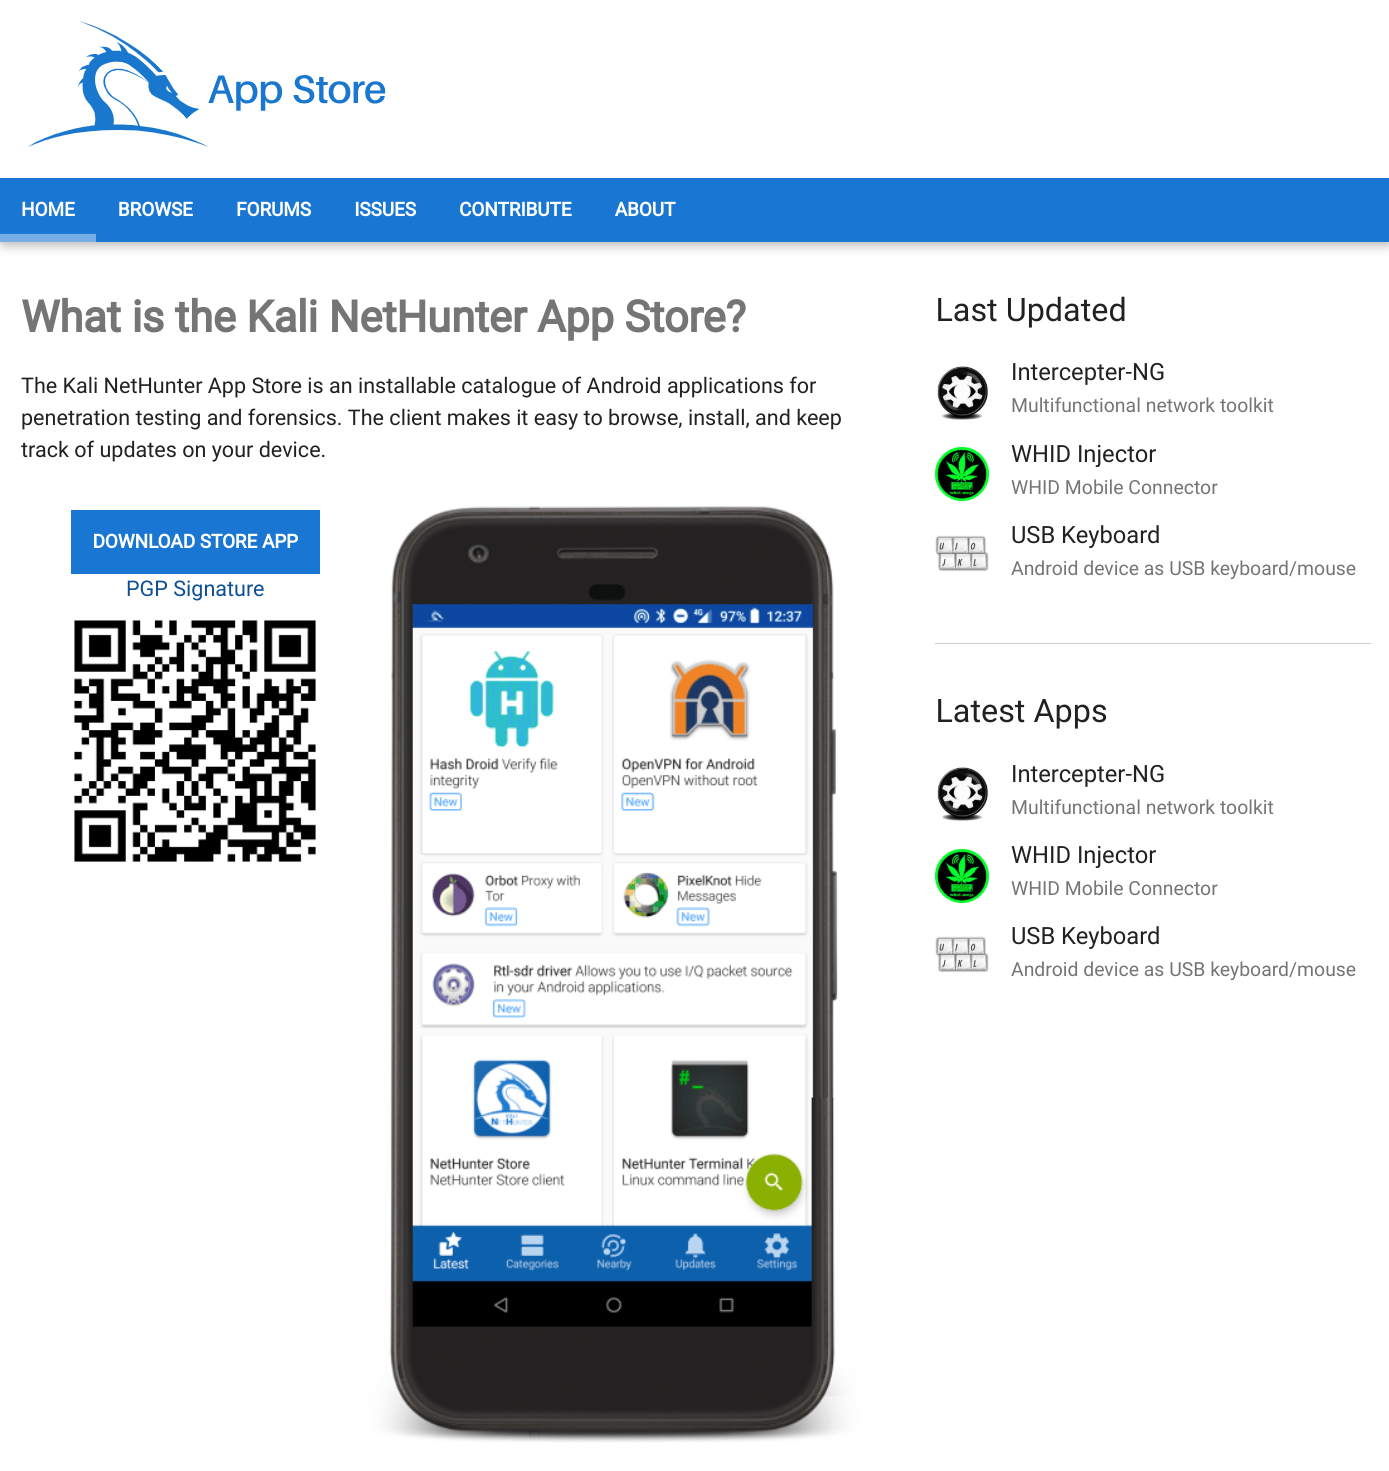 VSHOP::Appstore for Android